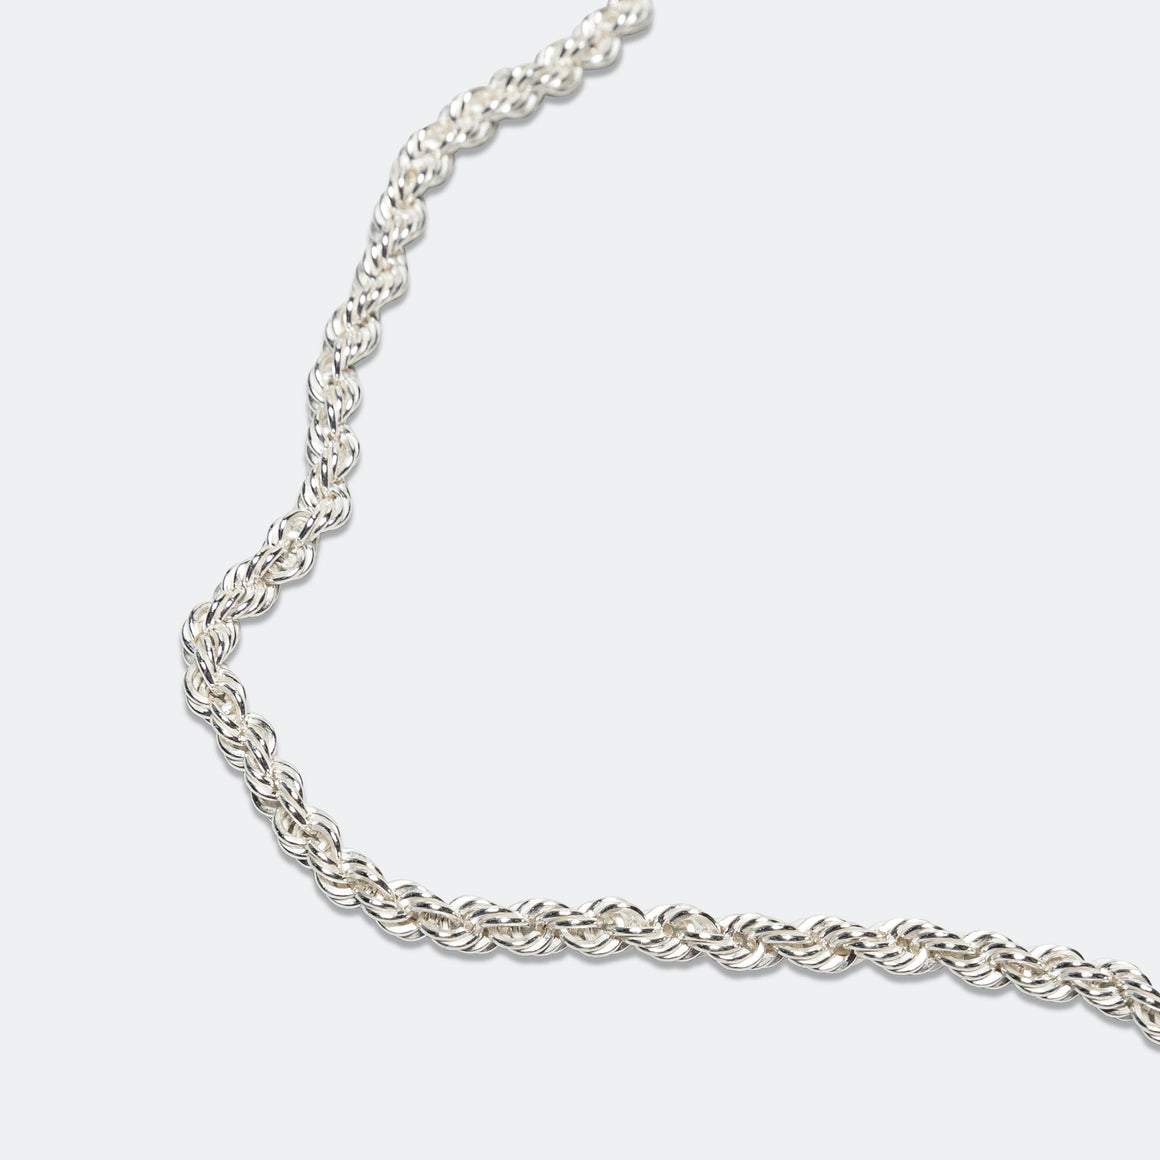 Pseushi - Rope Chain Necklace - 925 Silver - UP THERE